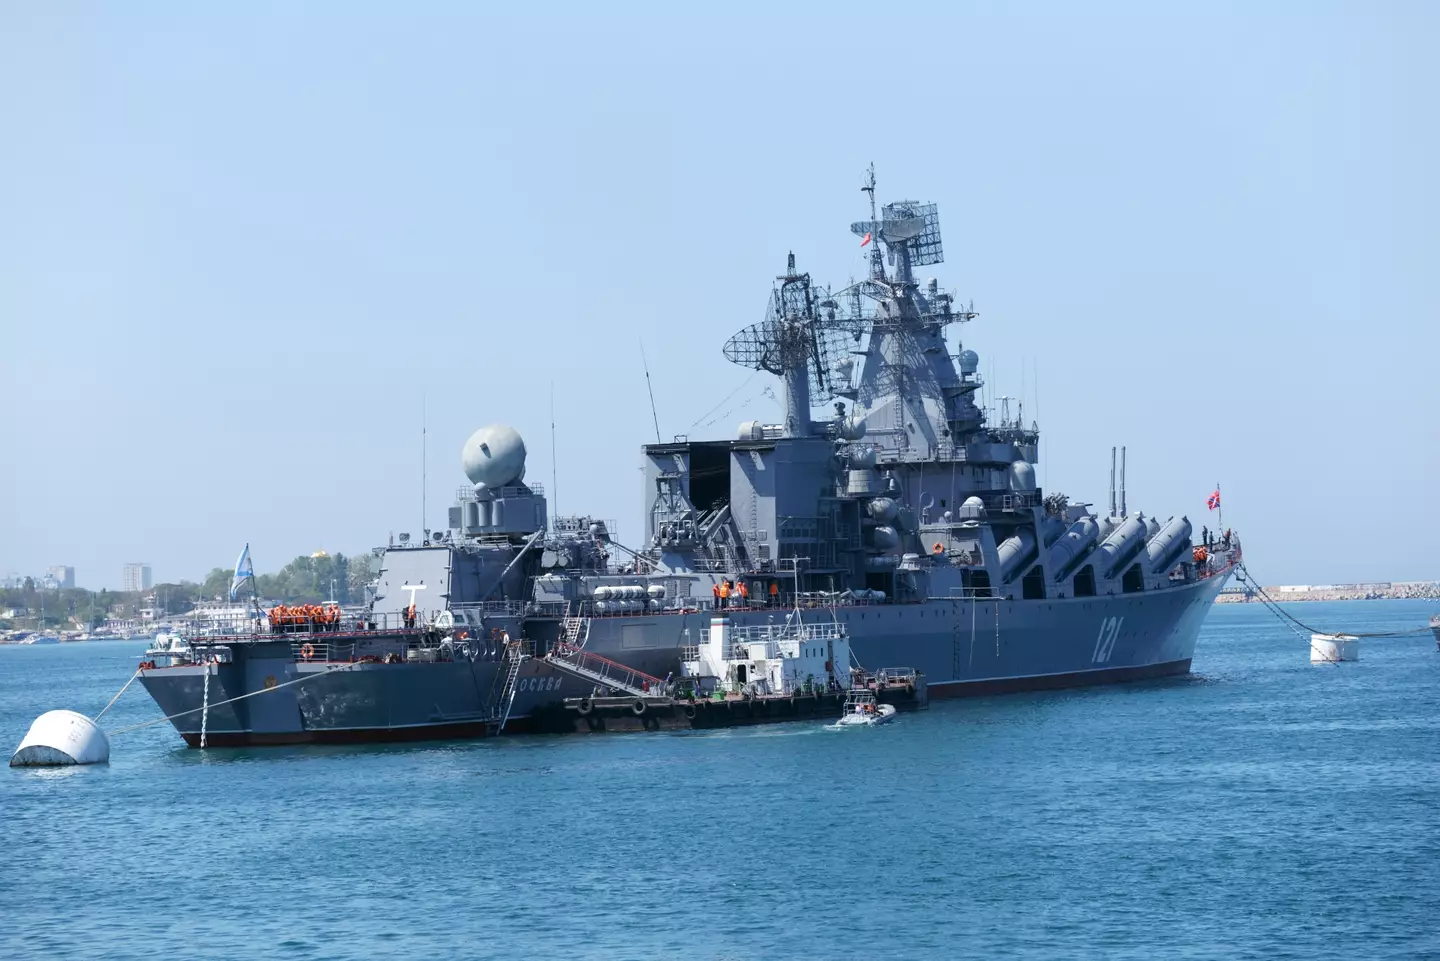 It was reported on Wednesday that the Moskva, Russia’s largest warship, has been hit by Ukrainian forces.